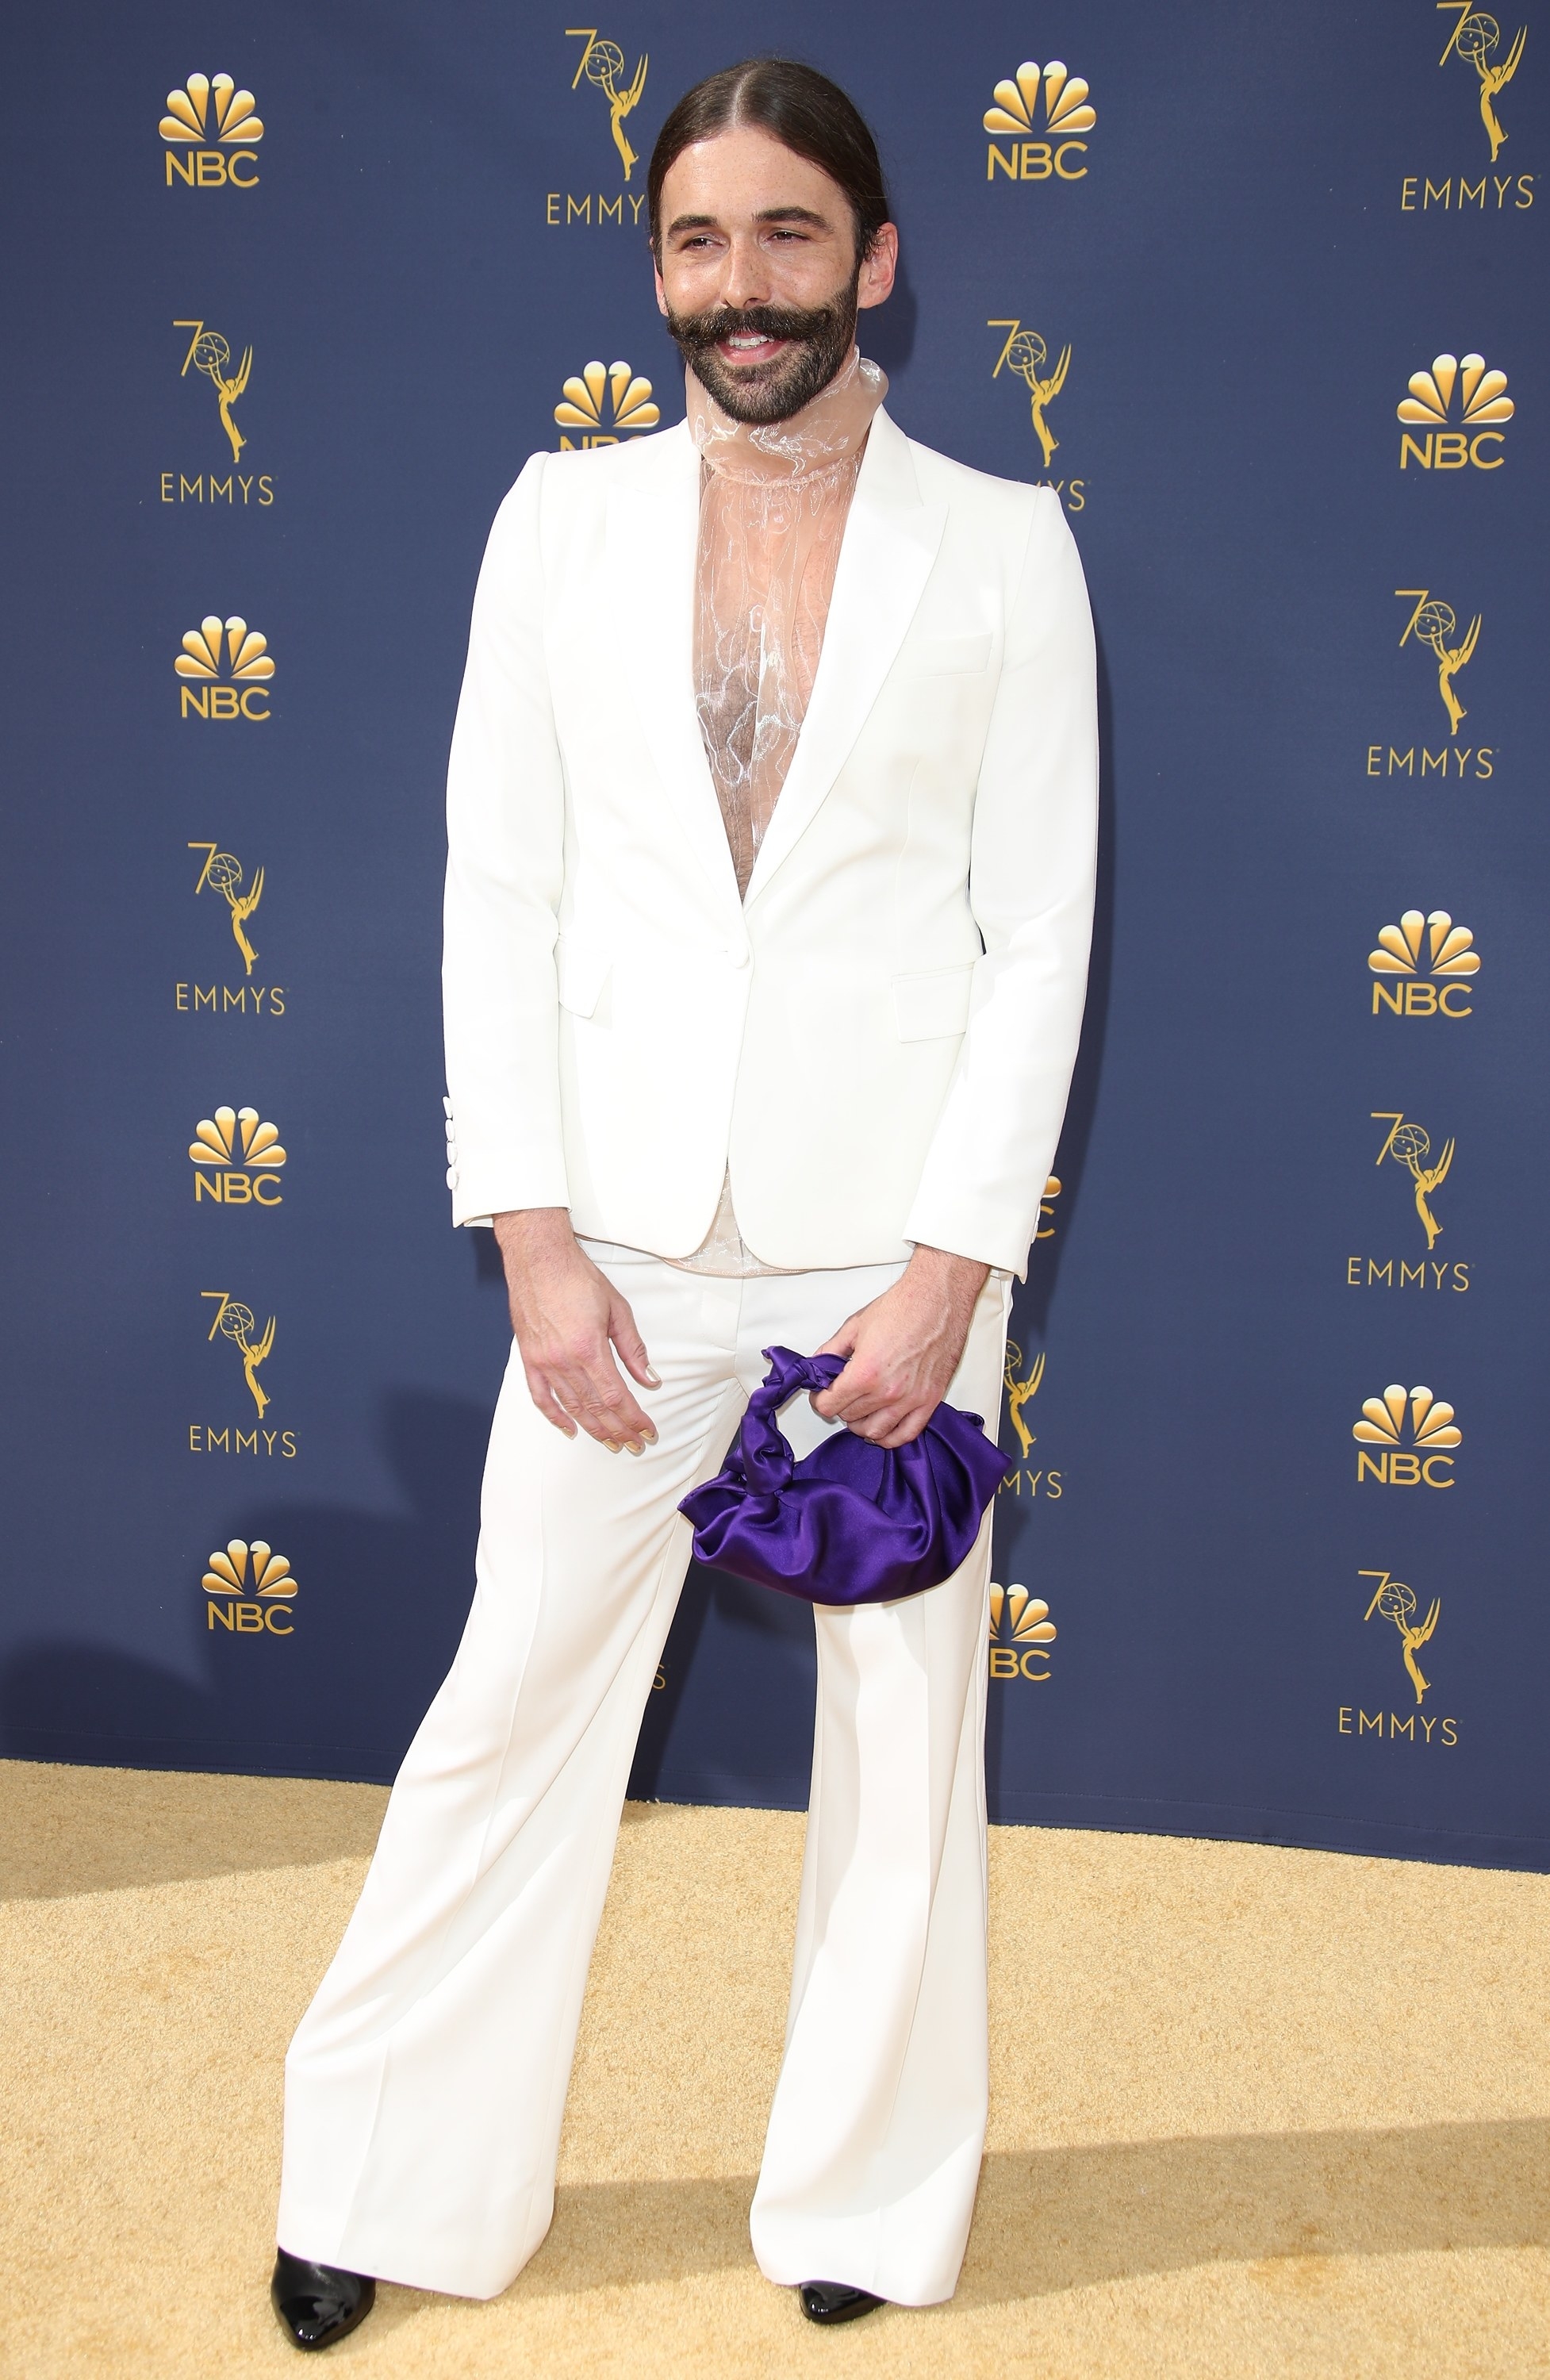 Jonathan Van Ness attends the 70th Emmy Awards at Microsoft Theater